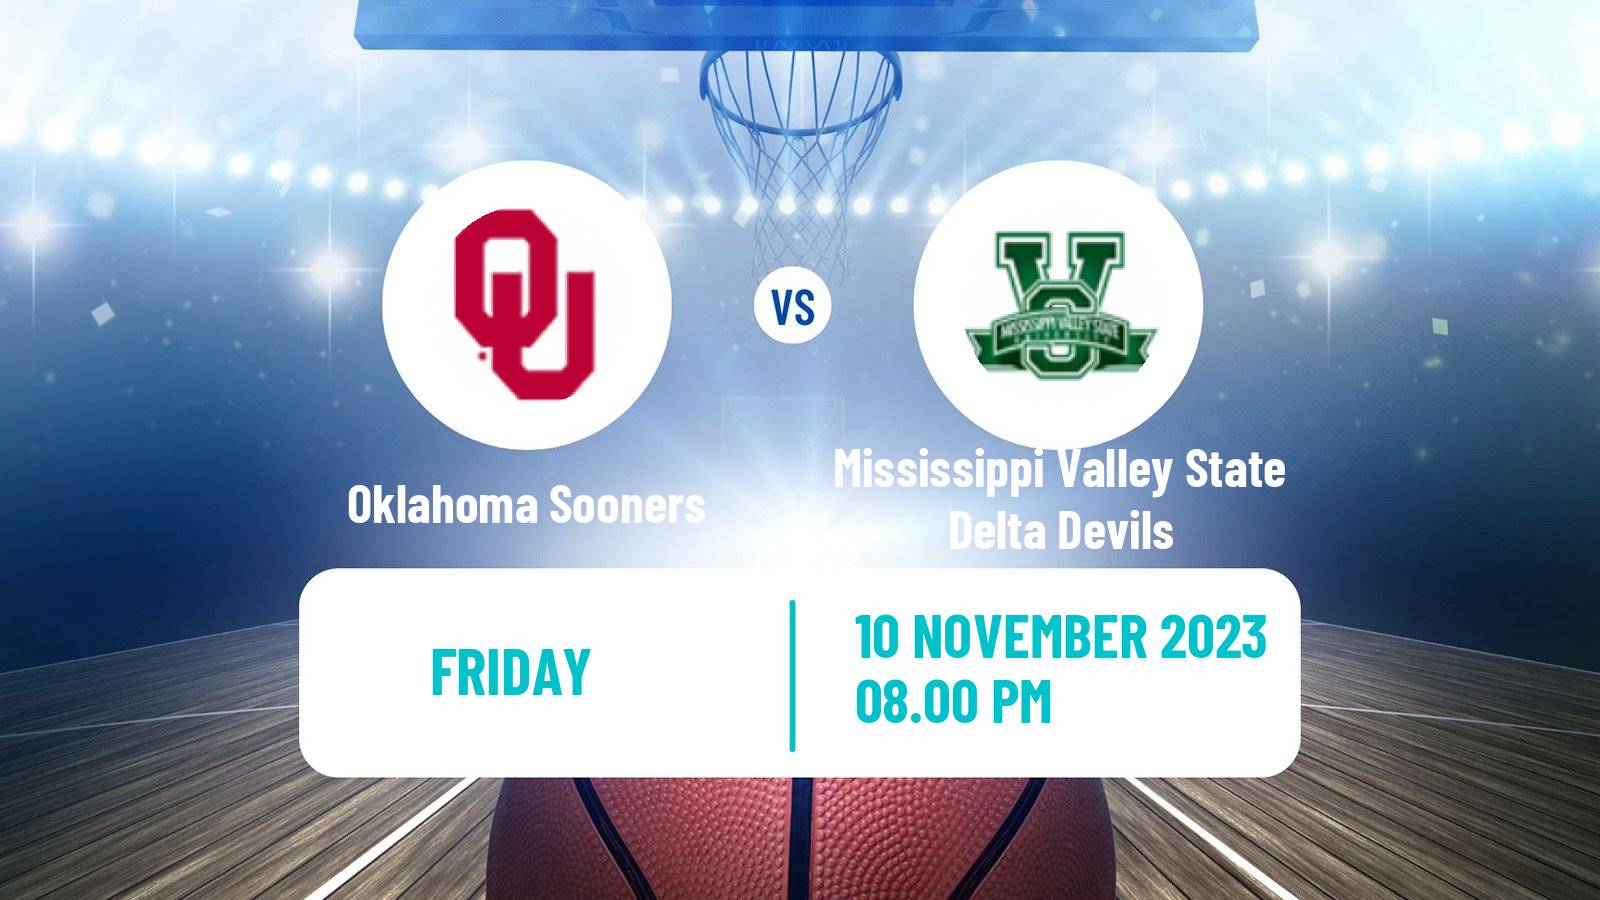 Basketball NCAA College Basketball Oklahoma Sooners - Mississippi Valley State Delta Devils